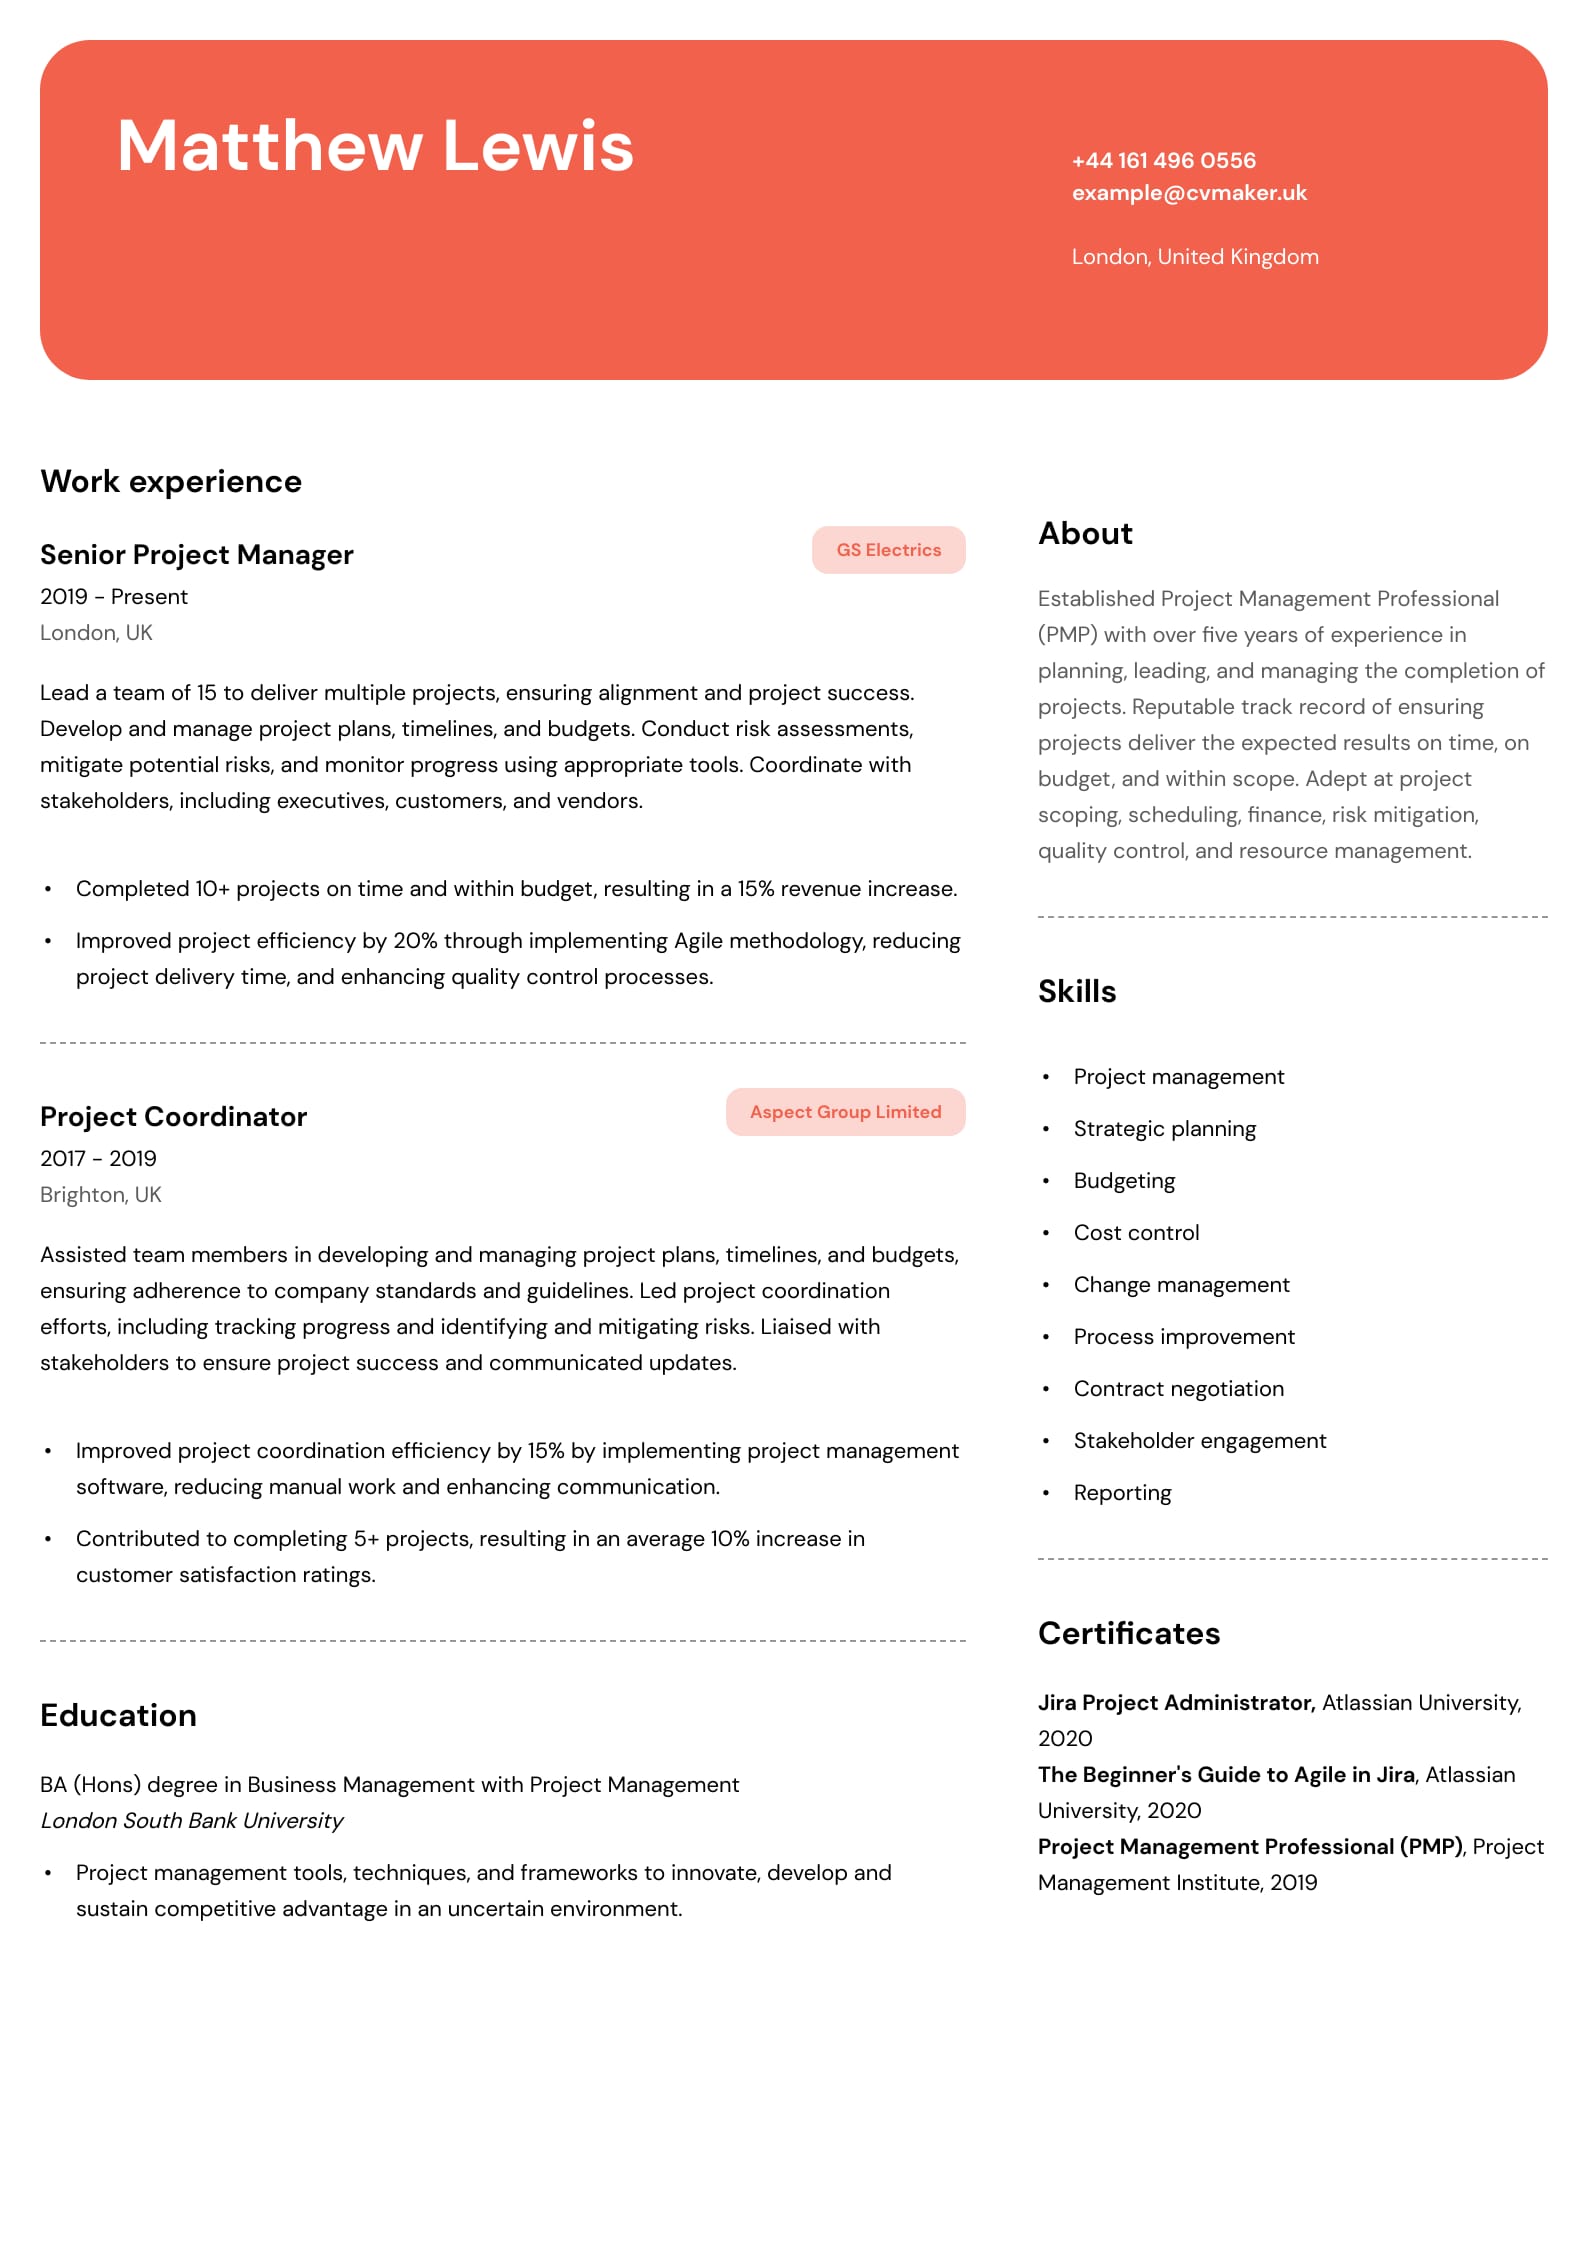 Project Manager CV sample